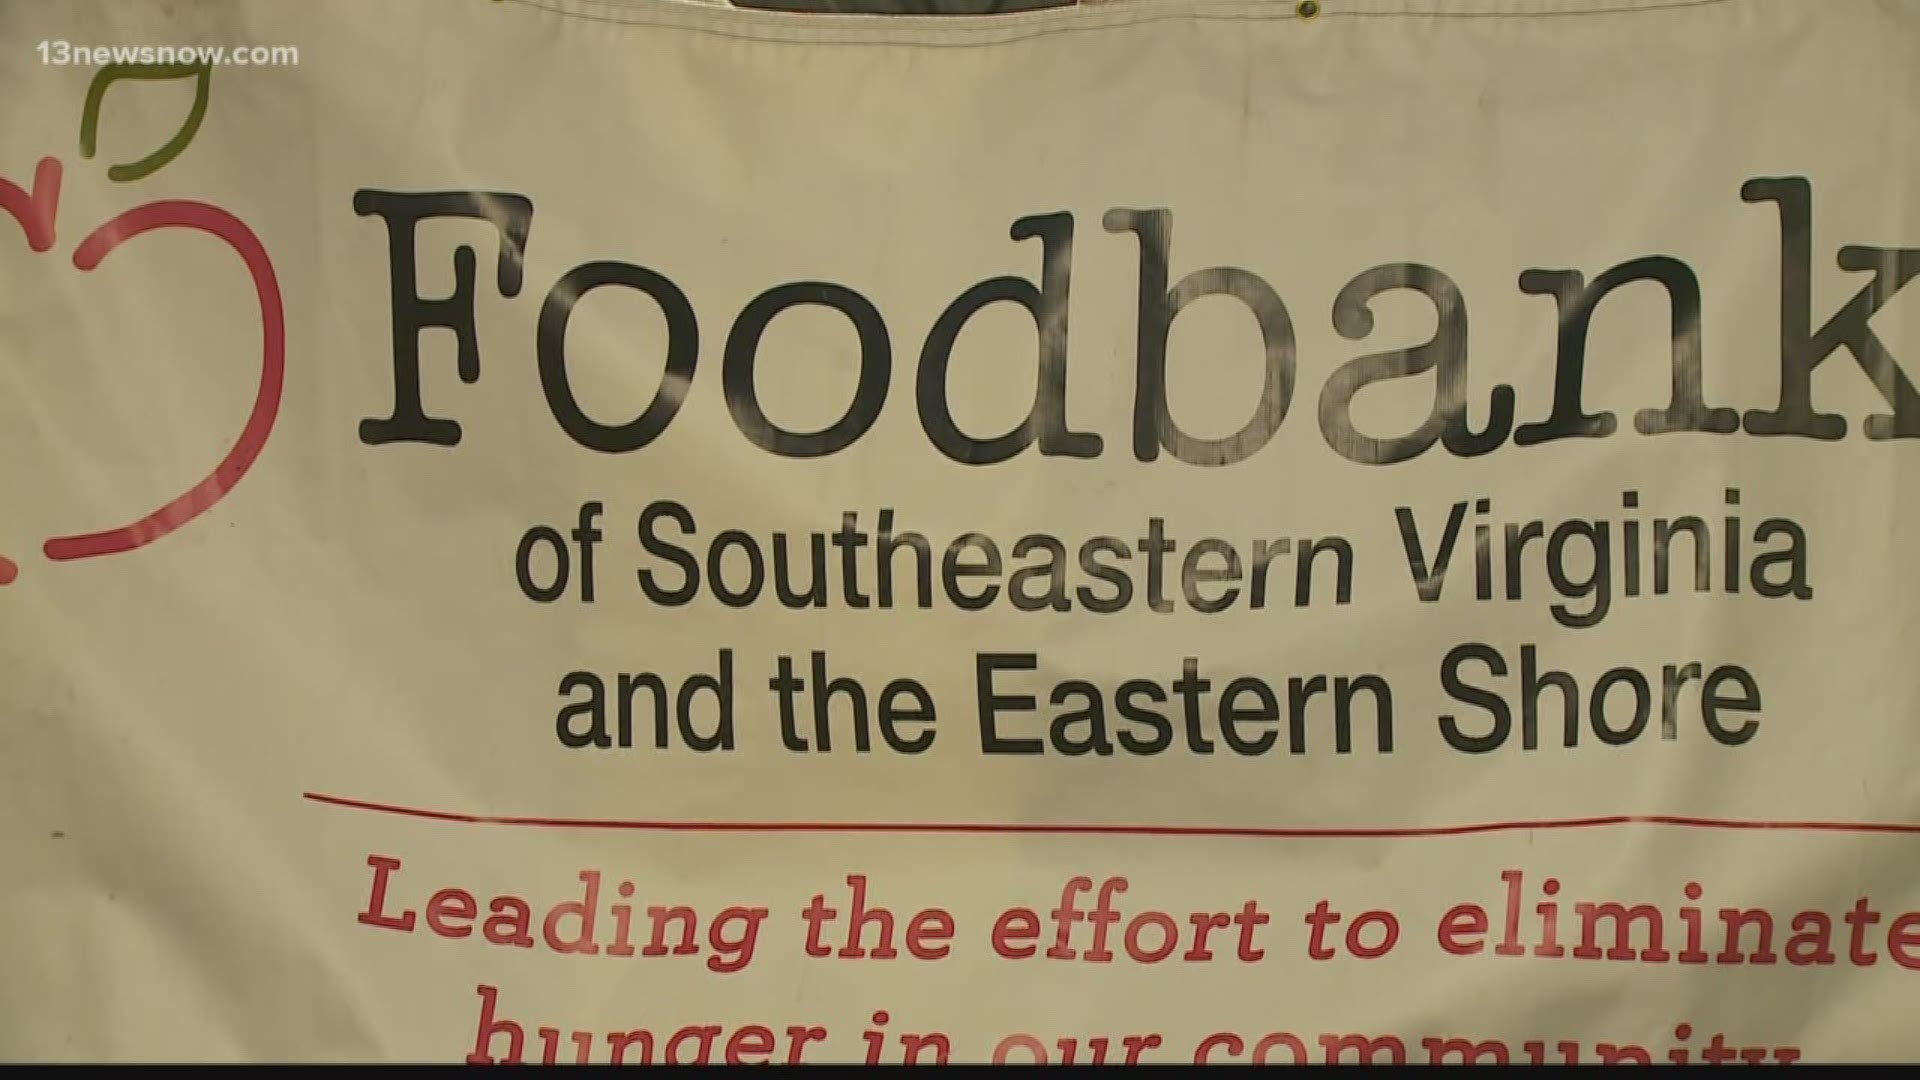 Despite the government reopening, the Foodbank of Southeastern Virginia and the Eastern Shore will continue to have their expanded hours for workers affected by shutdown until February.